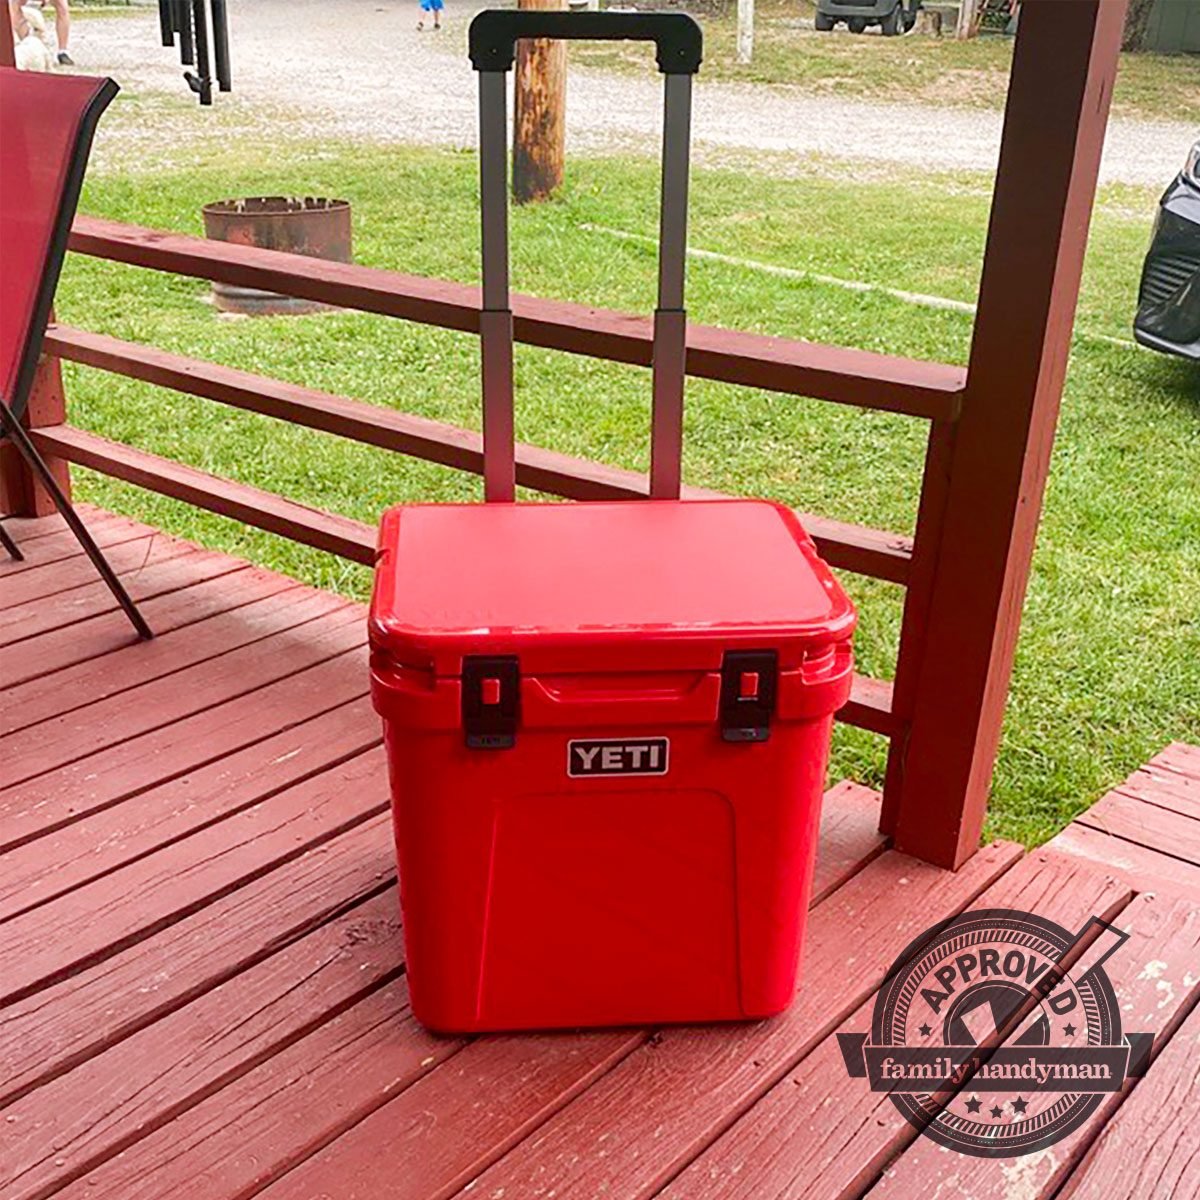 https://www.familyhandyman.com/wp-content/uploads/2023/08/FHM-The-9-Best-Yeti-Products-Our-Editors-Tested-and-Loved-Yeti-Roadie-48-Wheeled-Cooler-Mary-Henn-Family-Handyman-Yeti-Roadie-48_KSedit.jpg?fit=700%2C700